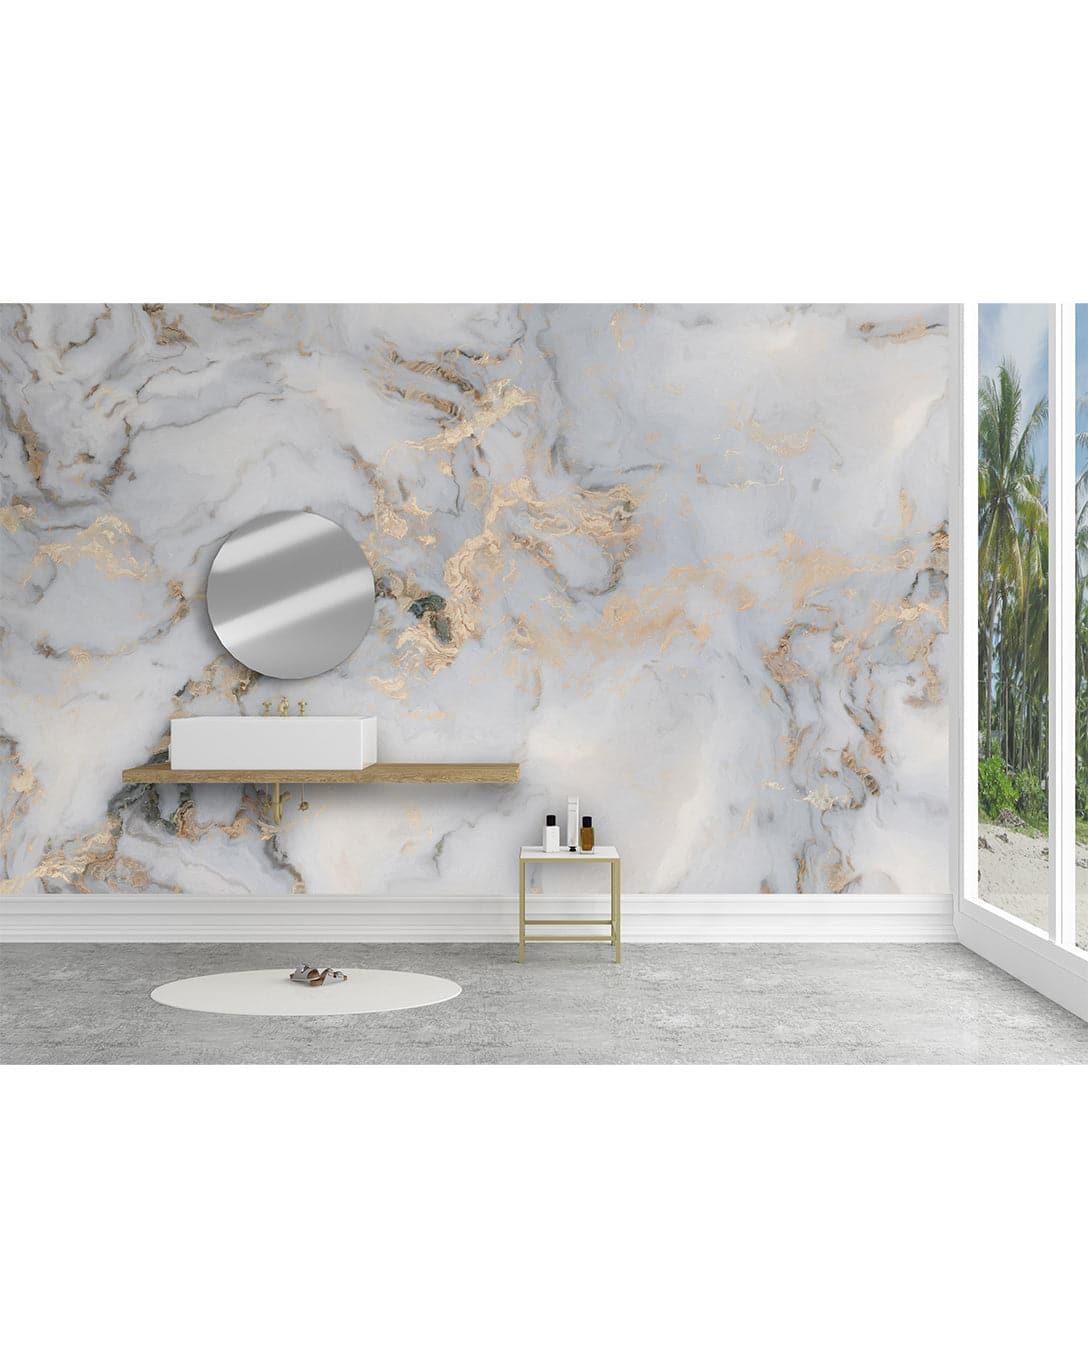 White Gray Gold Marble Paining Stone Wall Decal White Gray Gold Marble Paining Stone Wall Decal White Gray Gold Marble Paining Stone Wall Decal 